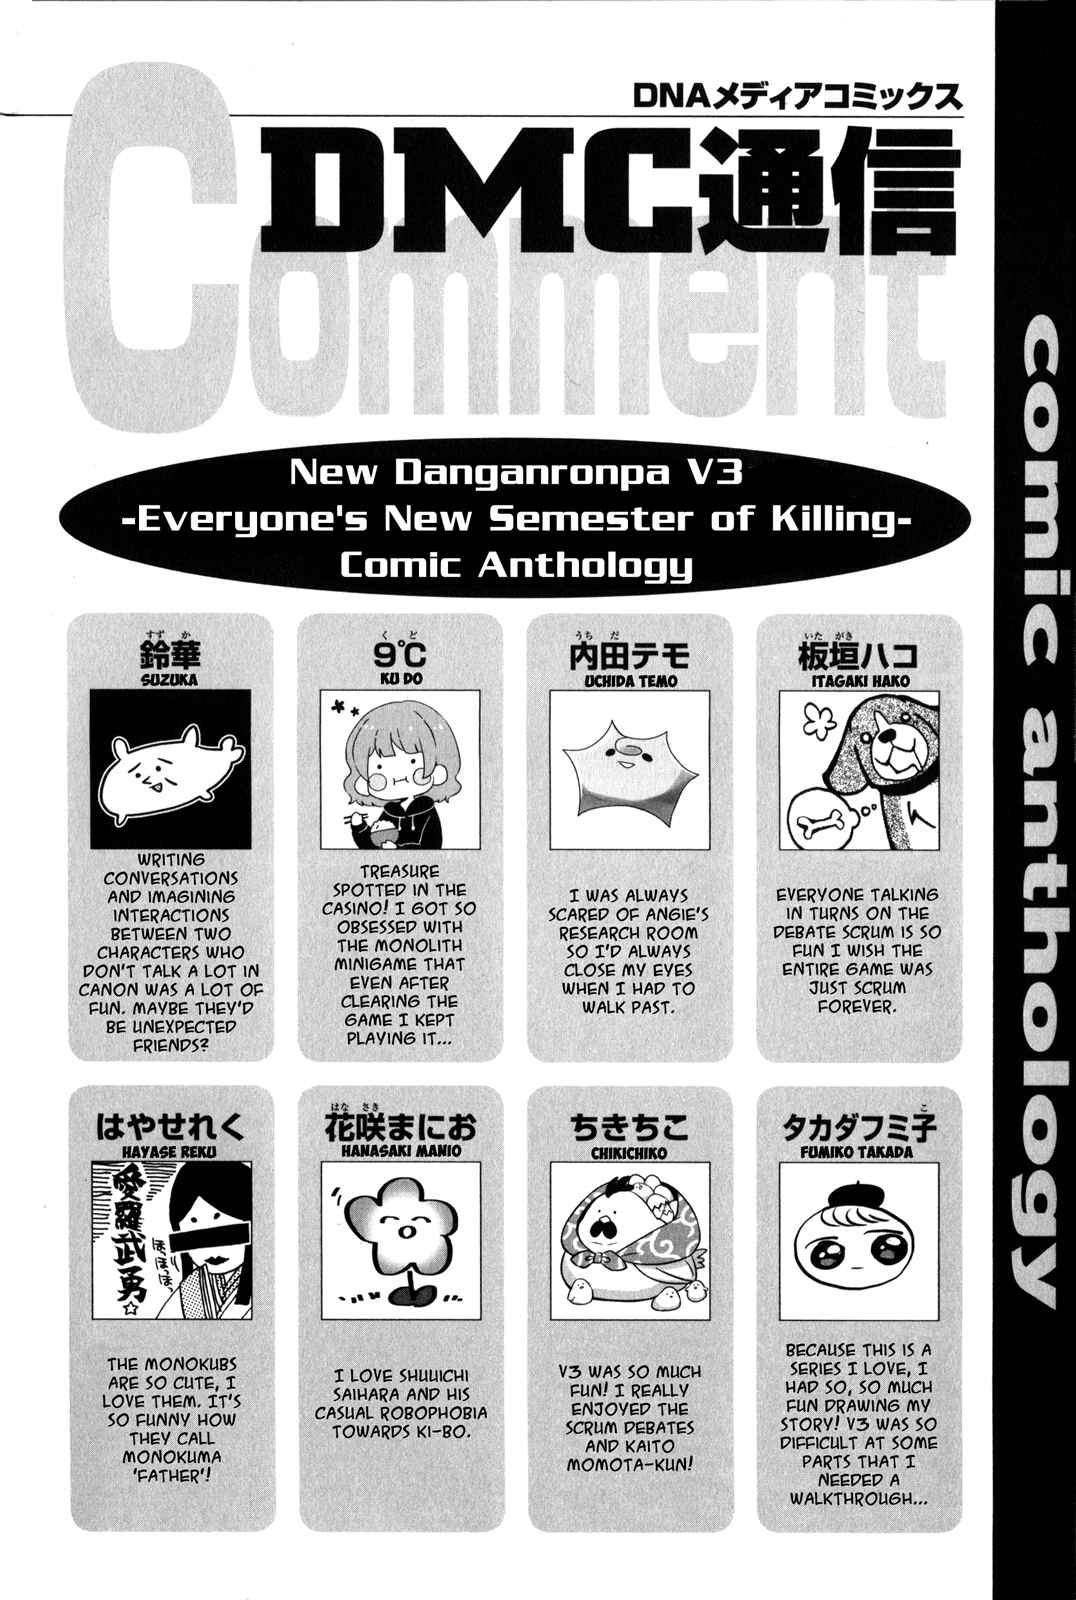 New Danganronpa Comic Anthology Vol. 1 Ch. 15 Living in Lazy Cosfined Environment by Hako Itagaki